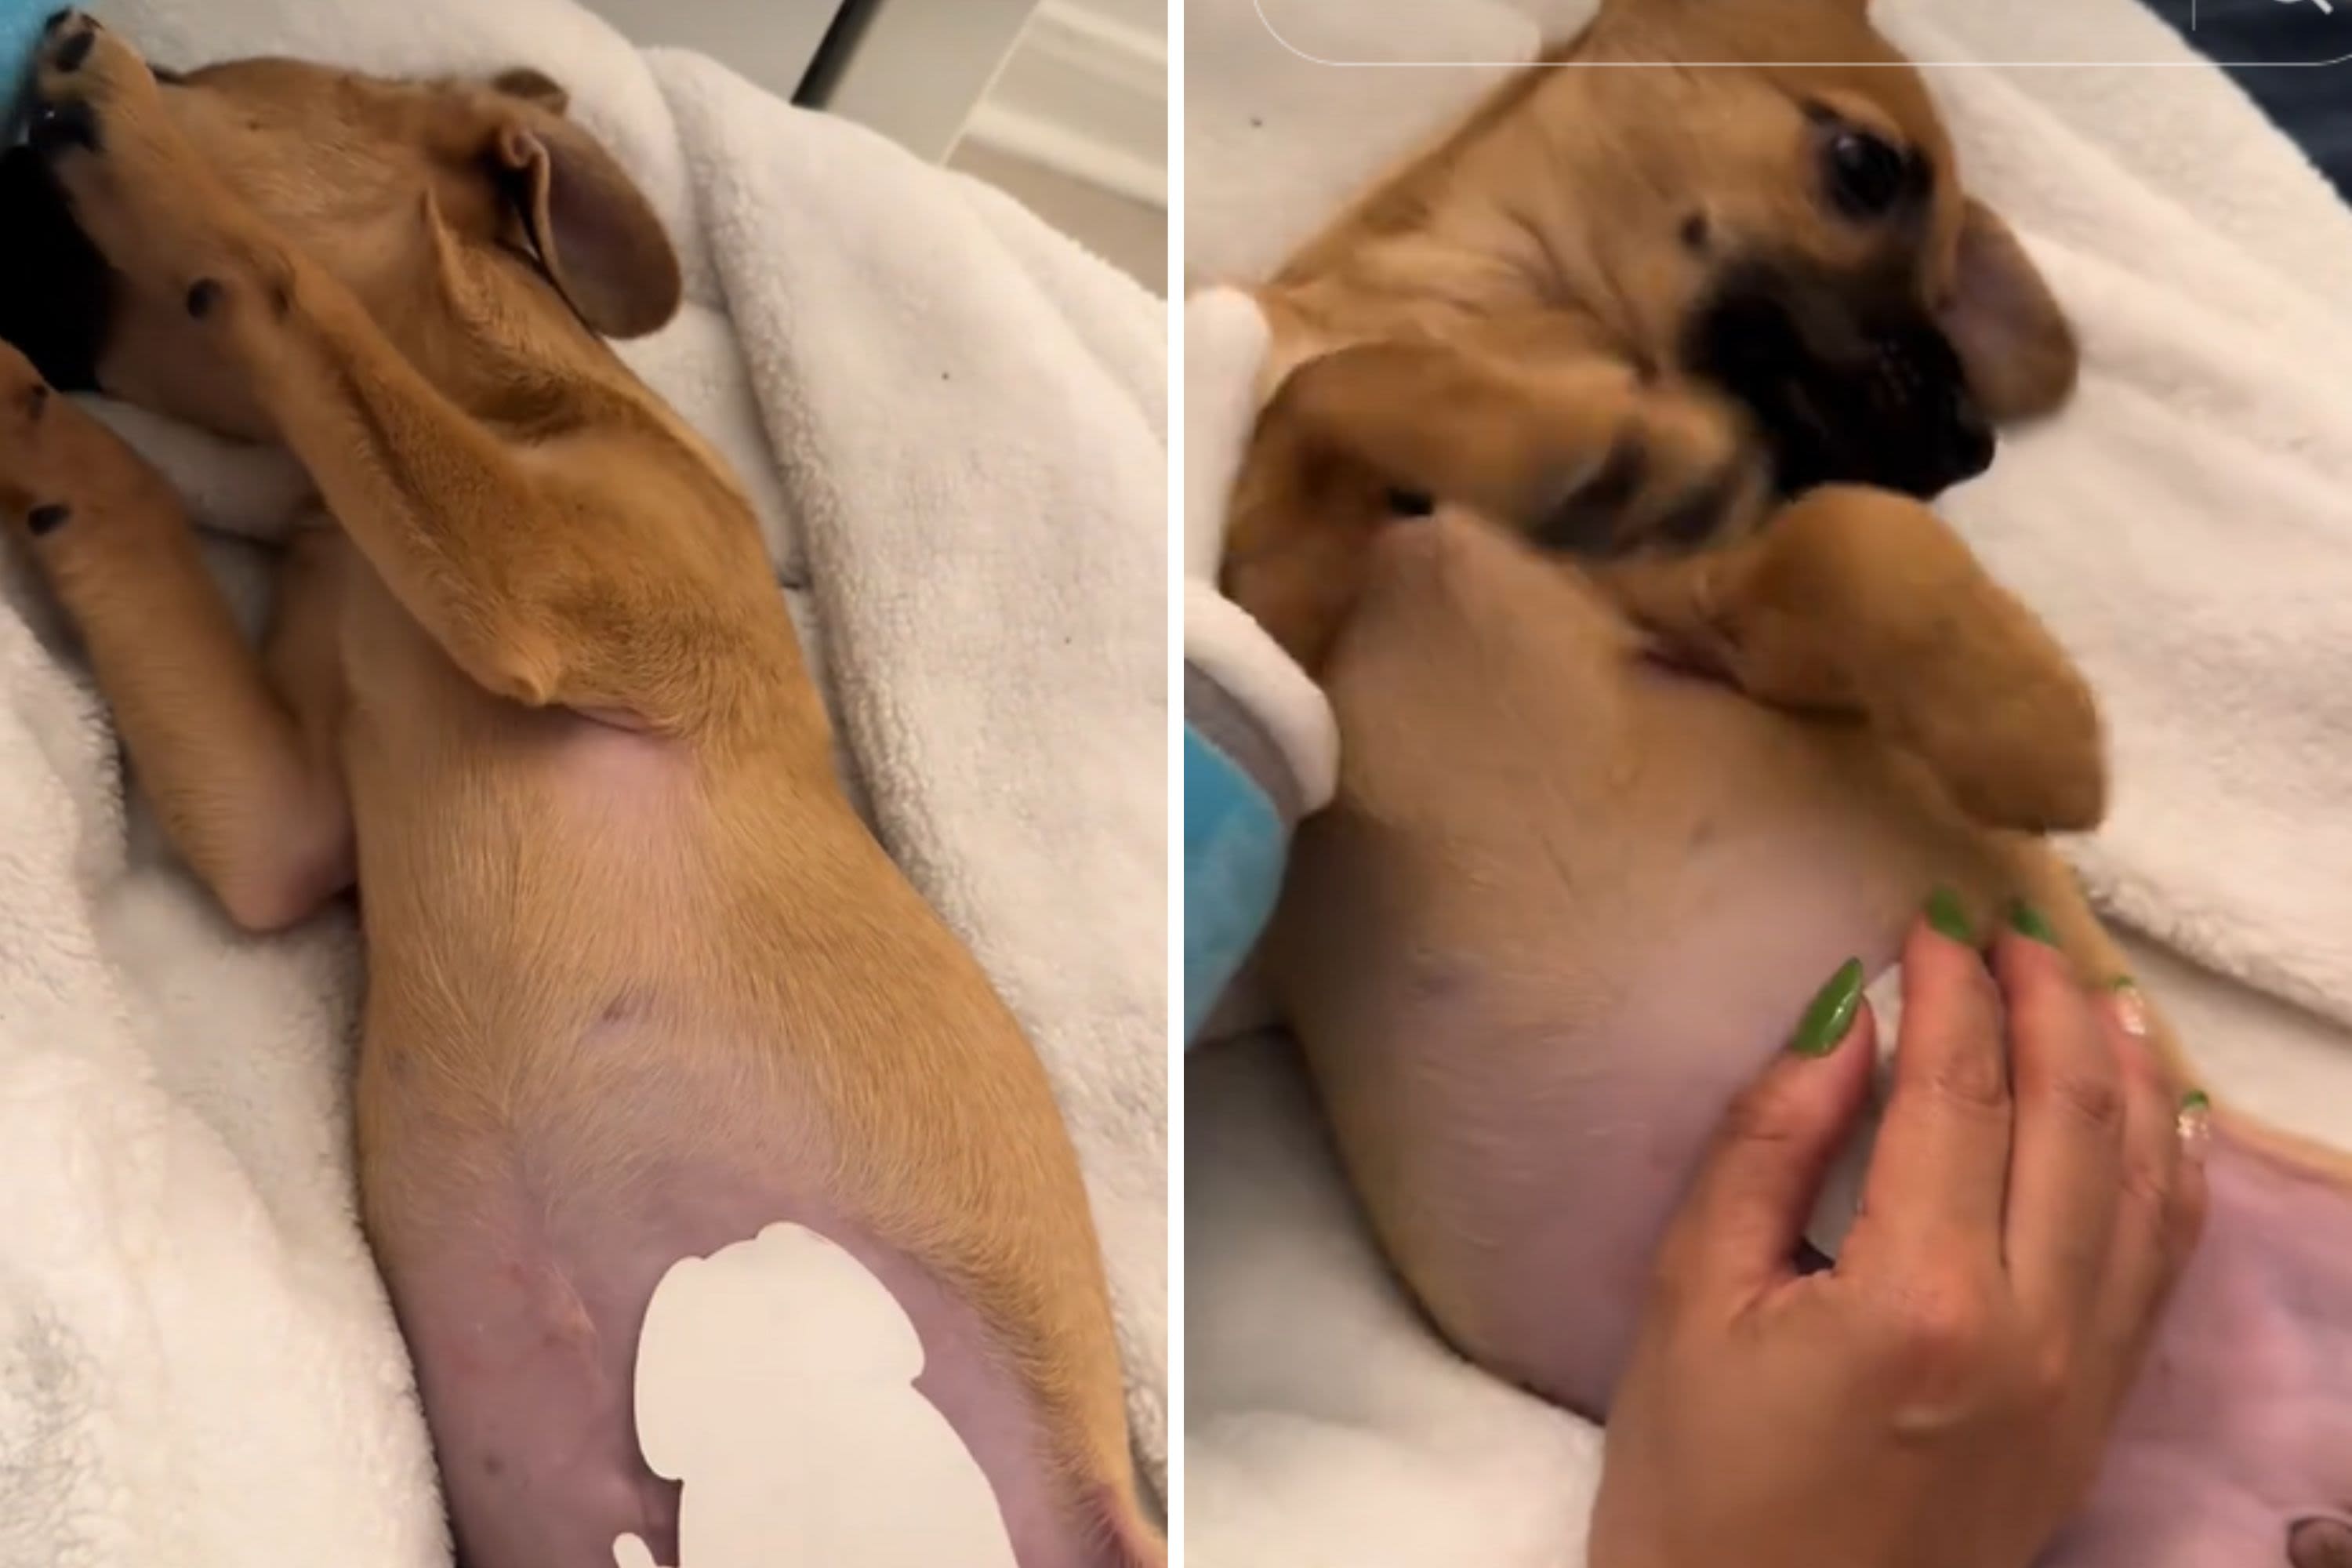 Woman gives foster puppy temporary tattoo—turns him into a "badass"